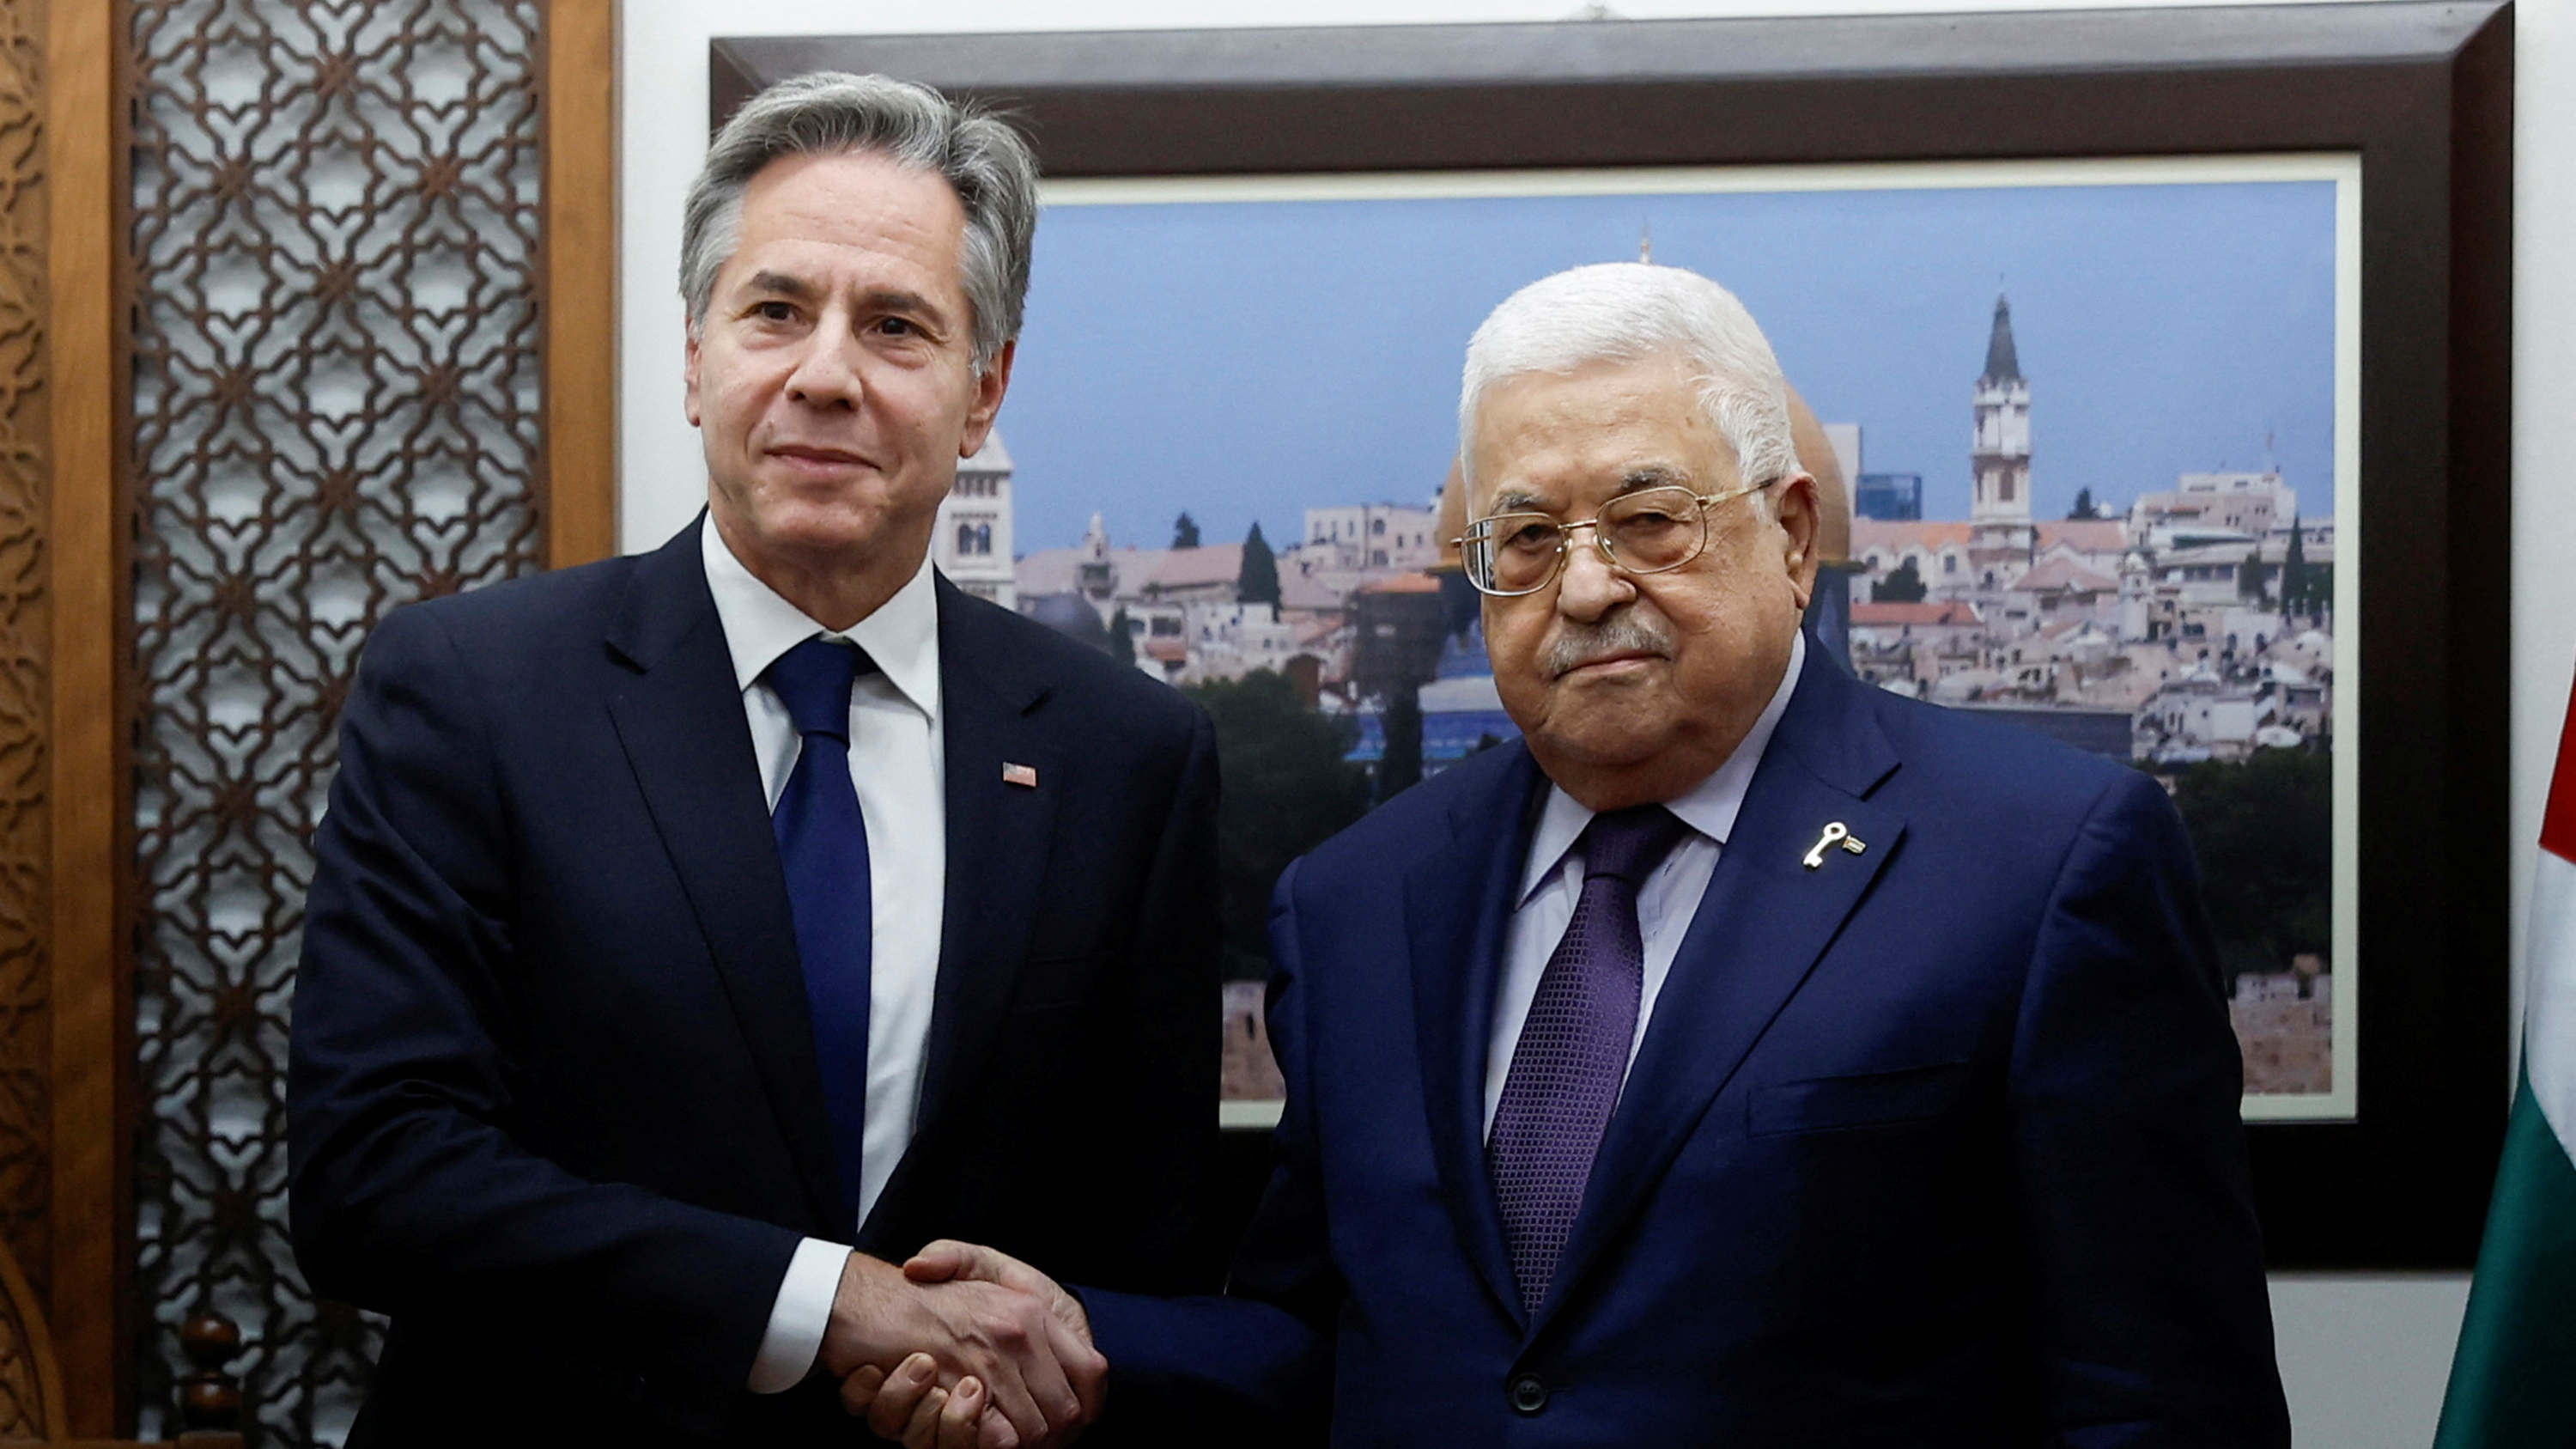 Blinken (left) meets Abbas at the Muqata in Ramallah on Sunday in the Israeli-occupied West Bank. /Jonathan Ernst/Reuters